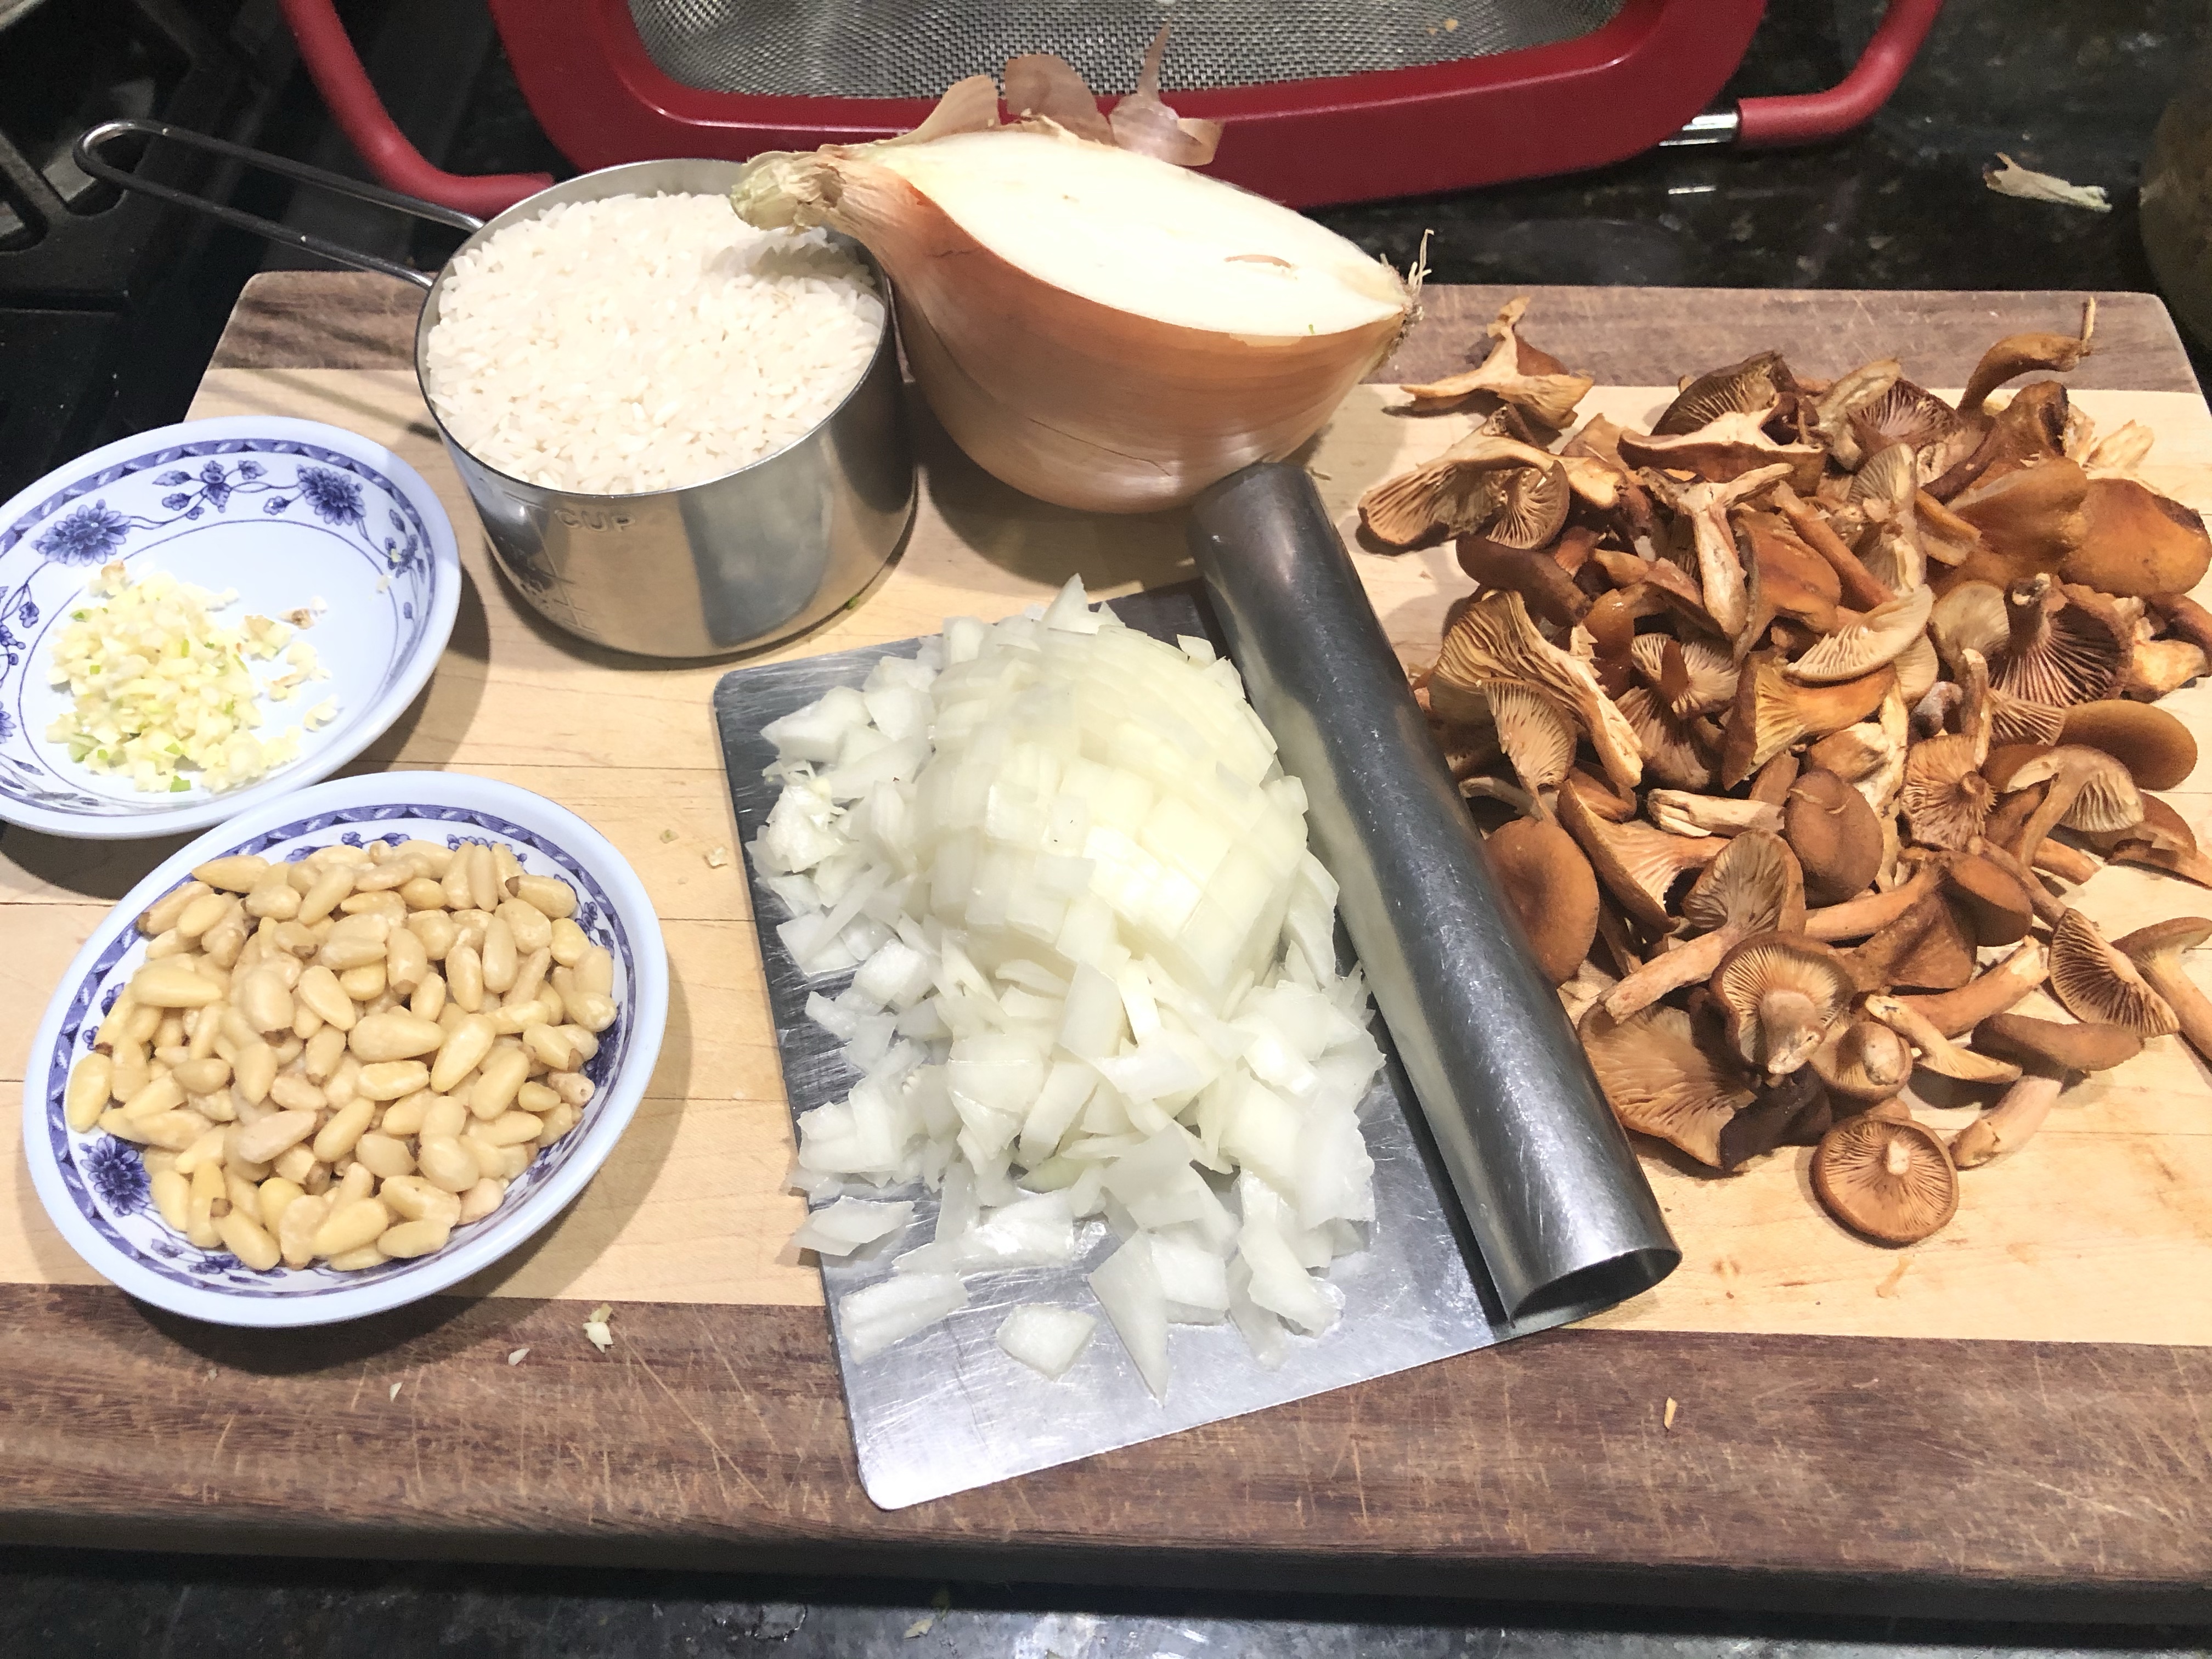 Ingredients prepared and ready to cook: white rice, garlic, onions, pine nuts, candy cap mushrooms